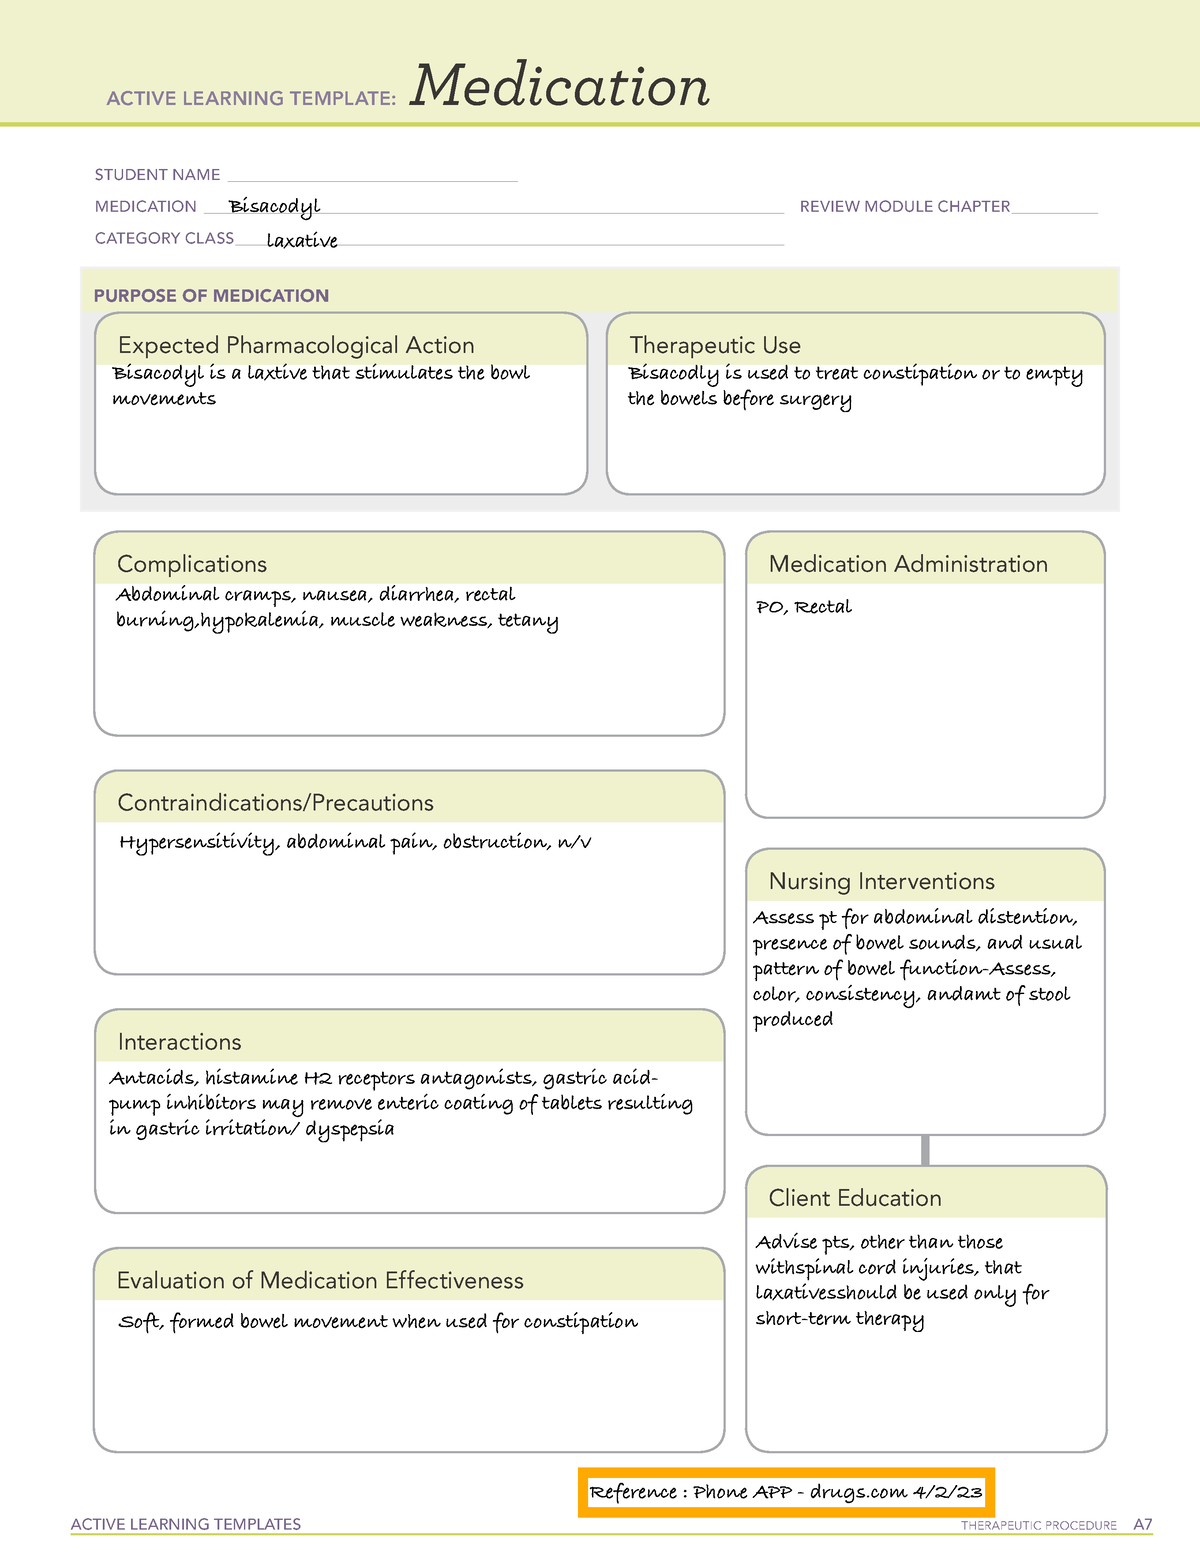 Bisacodyl medication cards ACTIVE LEARNING TEMPLATES THERAPEUTIC